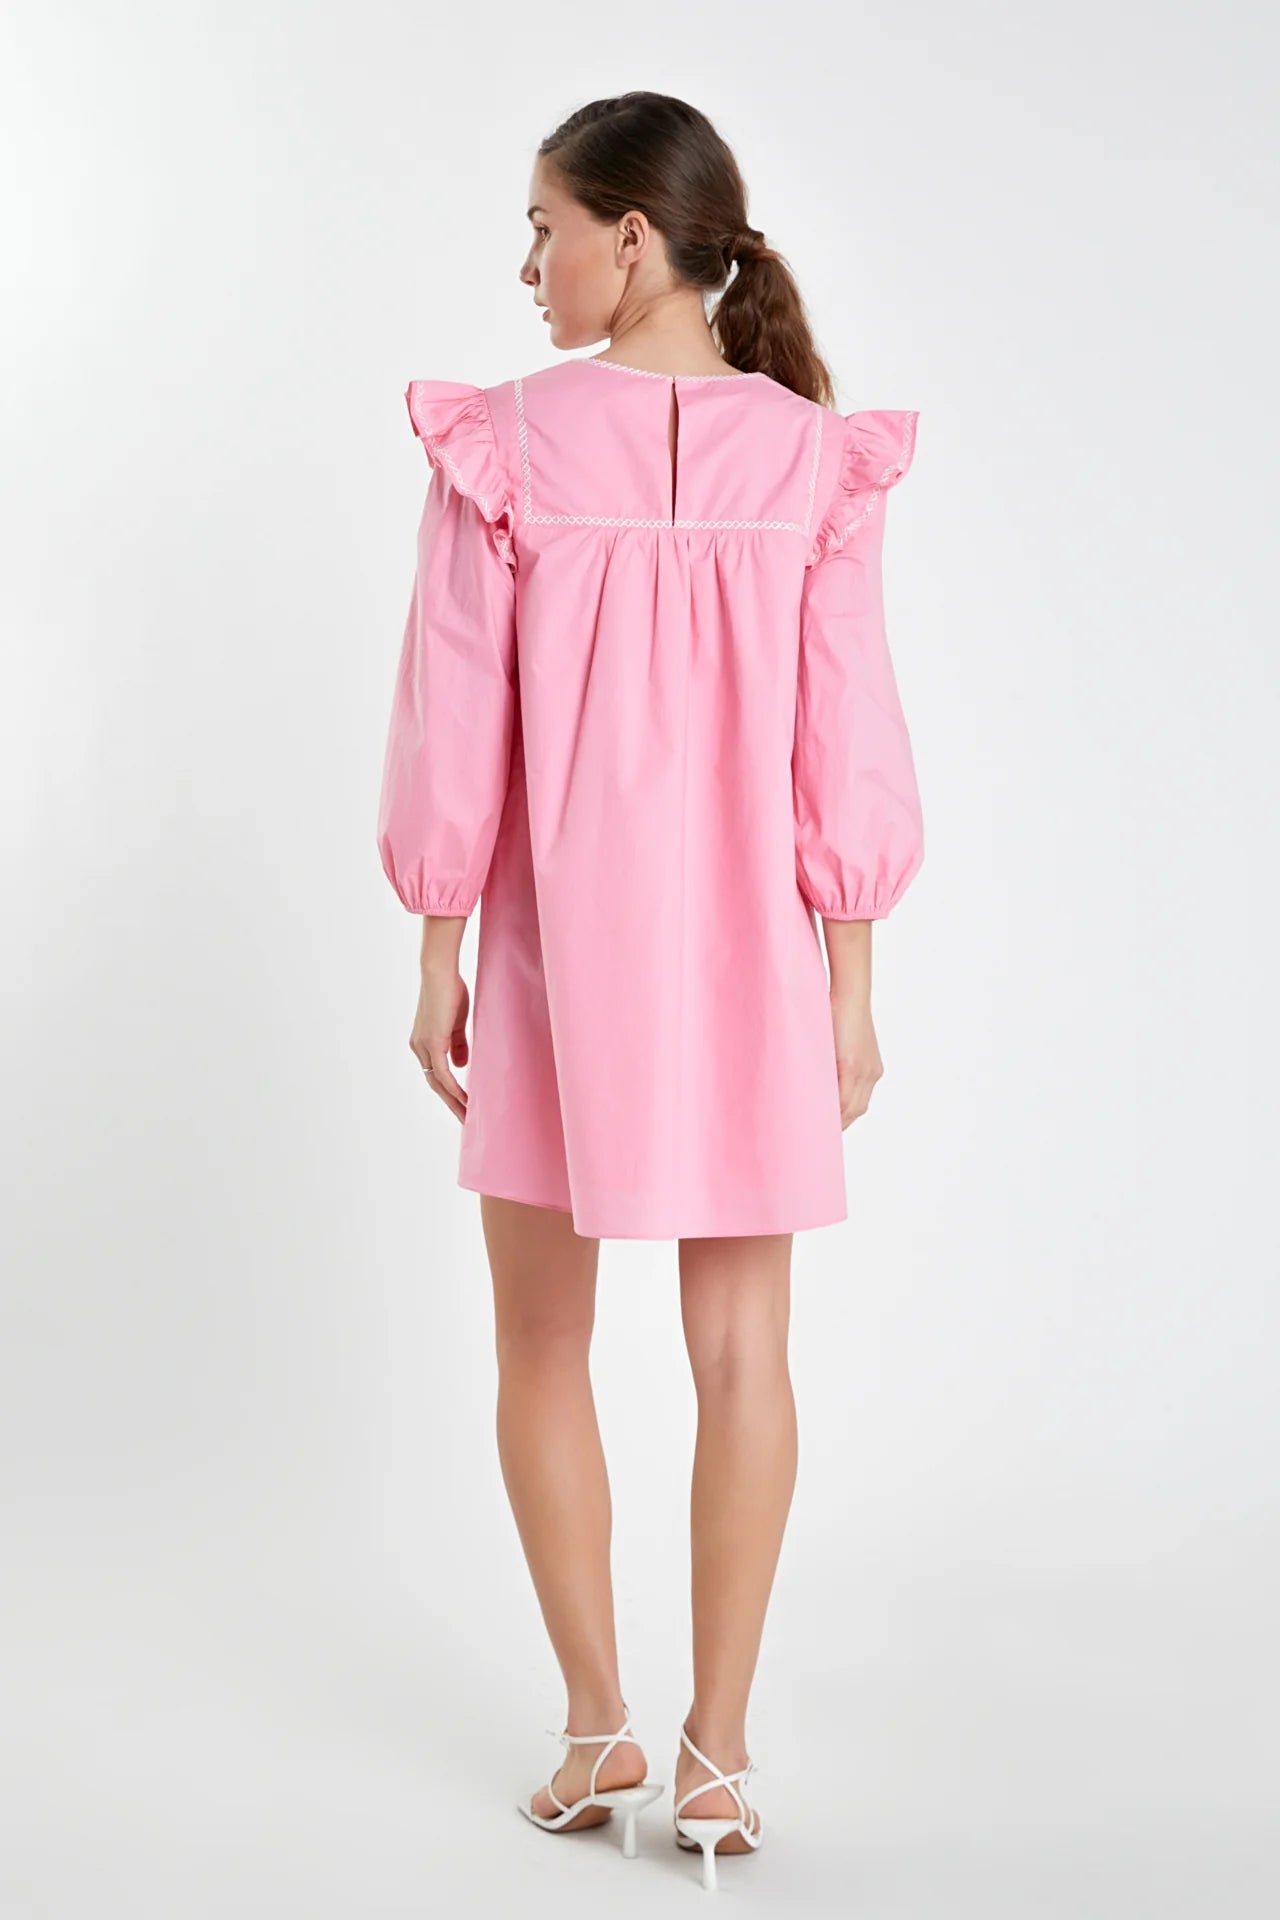 Contrast Embroidery Mini Dress Pink/White